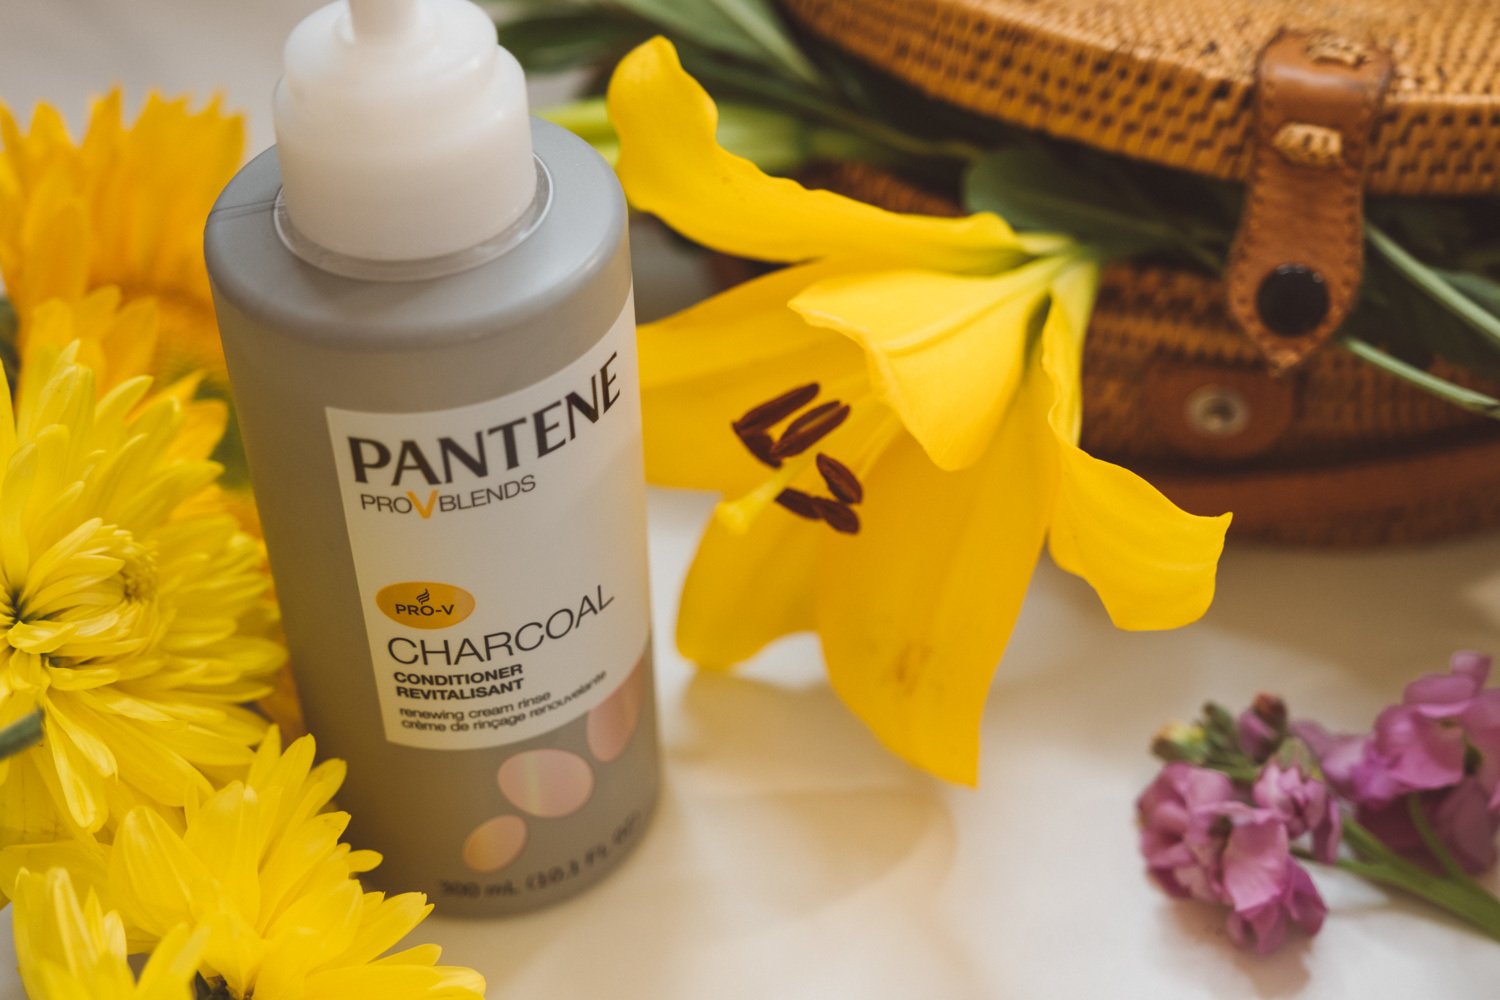 Pantene Charcoal Collection Review